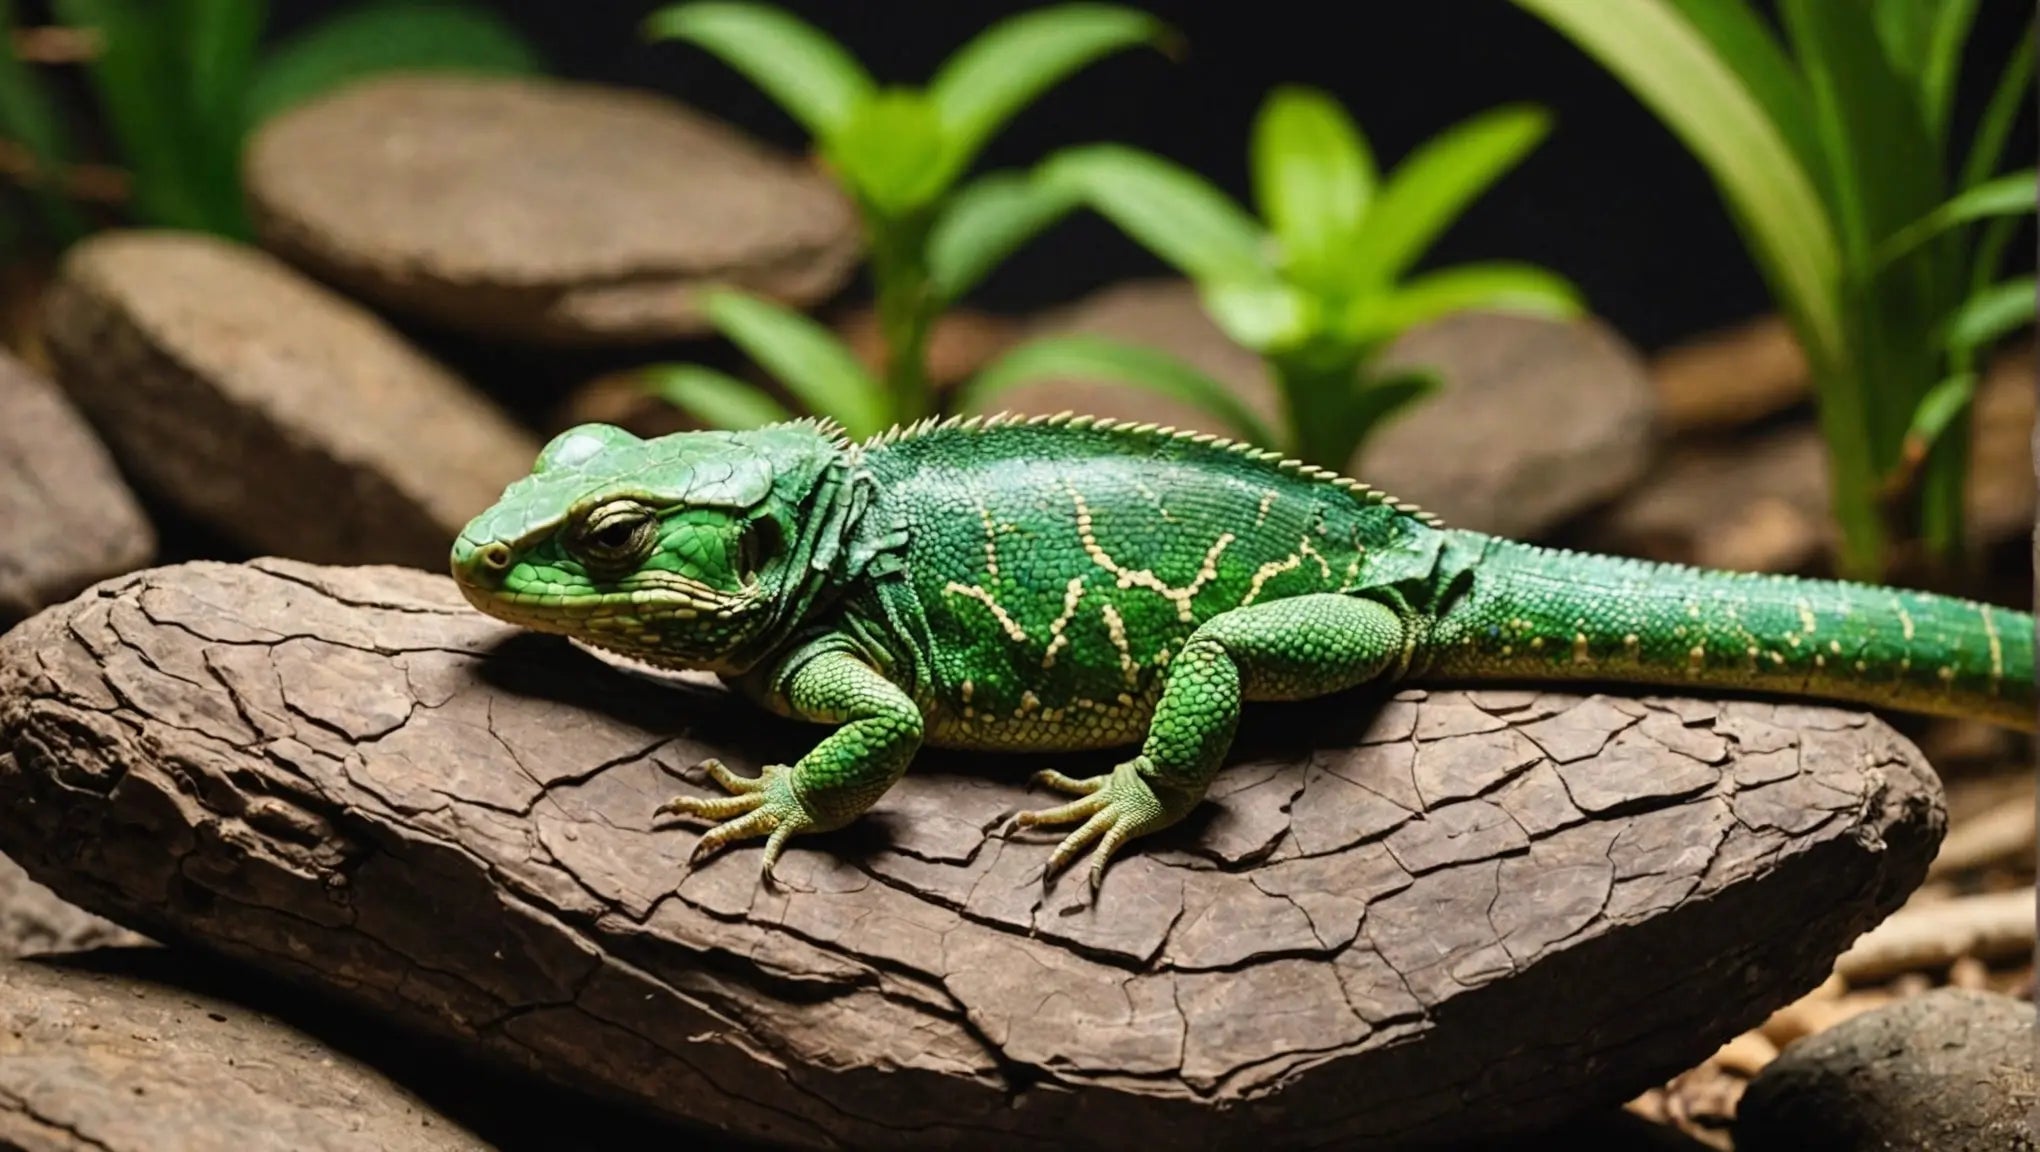 Find the Best Rocks for Your Reptile's Comfort